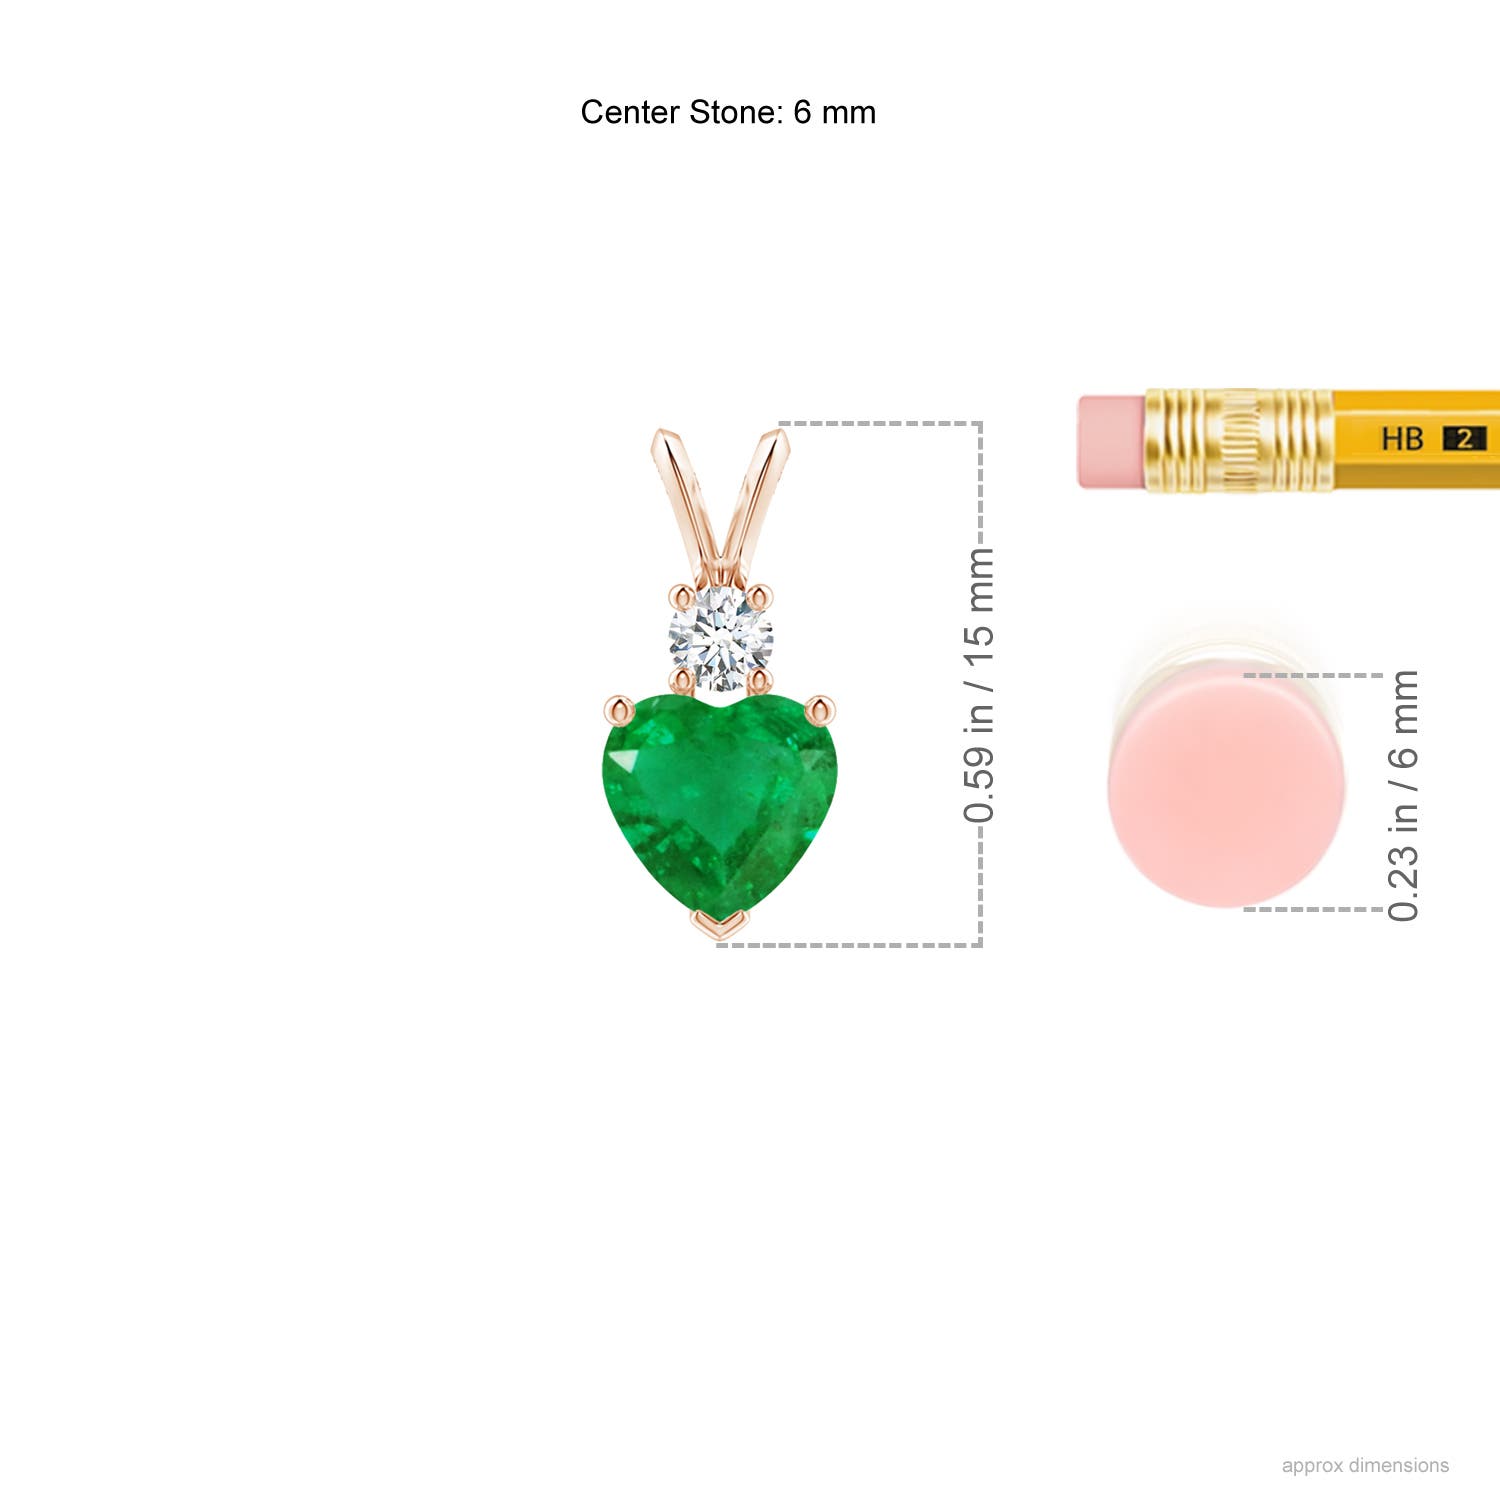 AA - Emerald / 0.68 CT / 14 KT Rose Gold